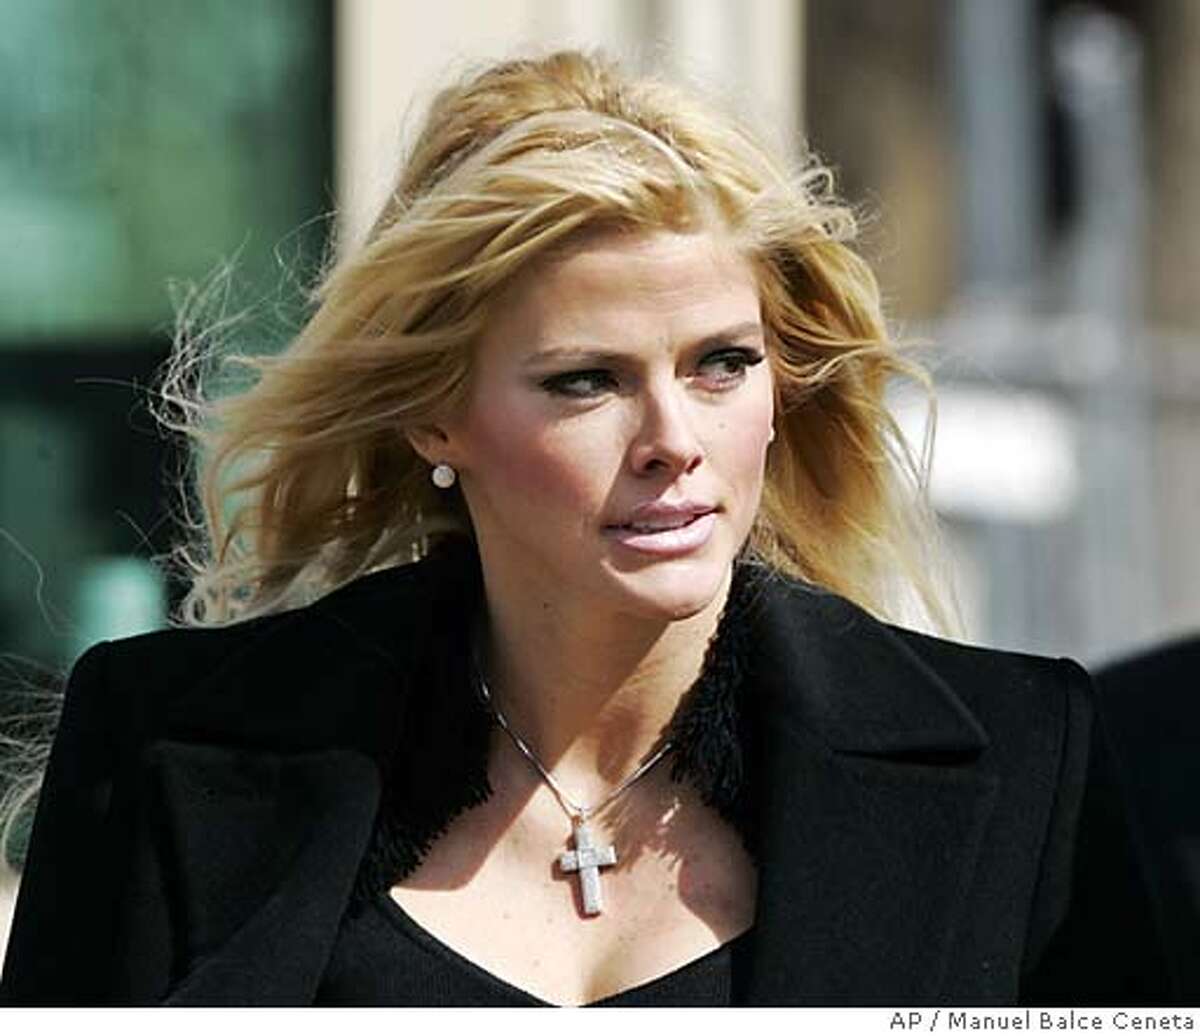 **FILE**Anna Nicole Smith, leaves the U.S. Supreme Court after he bid to collect millions of dollars from the estate of J. Howard Marshall II was presented on Feb. 28, 2006, in Washington. The court ruled Monday, May 1, 2006, that the one-time stripper and Playboy Playmate could pursue part of her late husband's oil fortune.(AP Photo/Manuel Balce Ceneta) Ran on: 05-02-2006 Anna Nicole Smith says her late husband planned to give her half his oil money. Ran on: 05-02-2006 Anna Nicole Smith says her late husband planned to give her half his oil money. Ran on: 02-23-2007 Judge Larry Seidlin awards custody of Anna Nicole Smiths body to Richard Millstein, who is representing her baby daughter, Dannielynn. Ran on: 02-23-2007 Judge Larry Seidlin awards custody of Anna Nicole Smiths body to Richard Millstein, who is representing her baby daughter, Dannielynn. A FEB 28 2006 FILE PHOTO